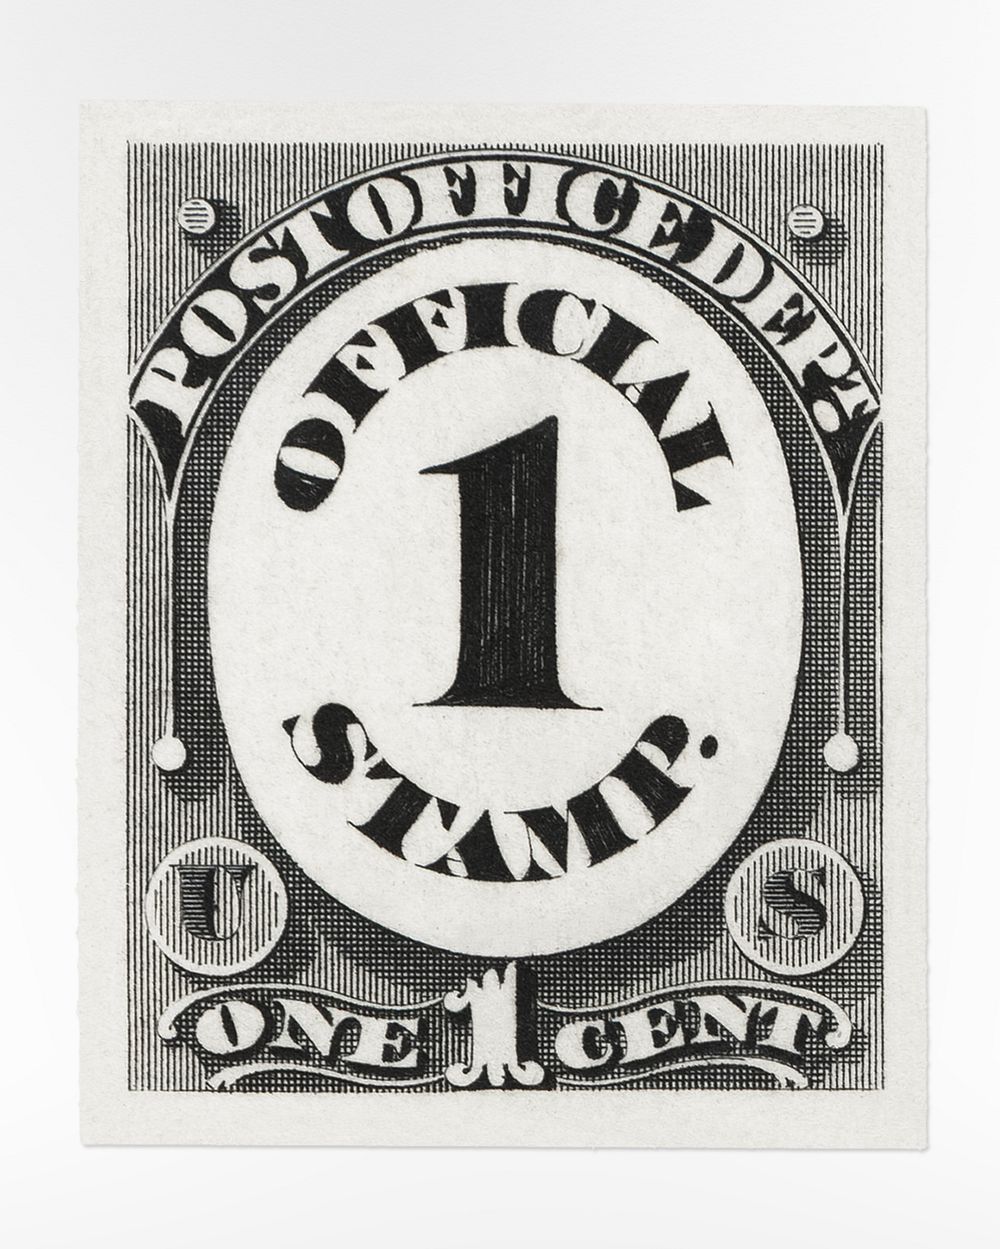 1c Post Office Department card plate proof. Original public domain image from Smithsonian. Digitally enhanced by rawpixel.